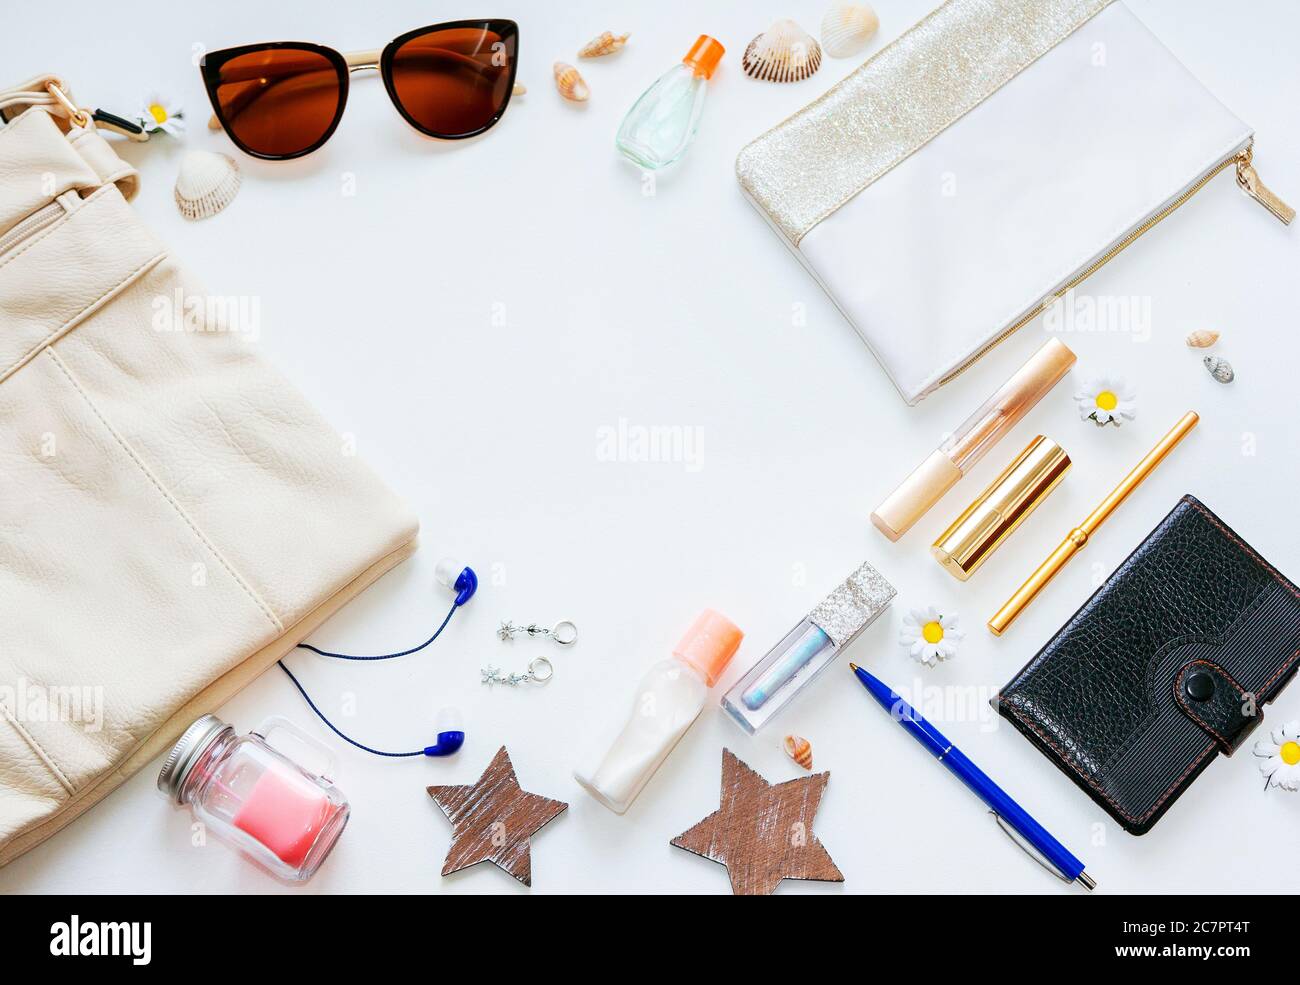 Outfit of young woman or modern teenager girl on white background - cosmetic and lifestyle accessories. Flat lay objects. Stock Photo